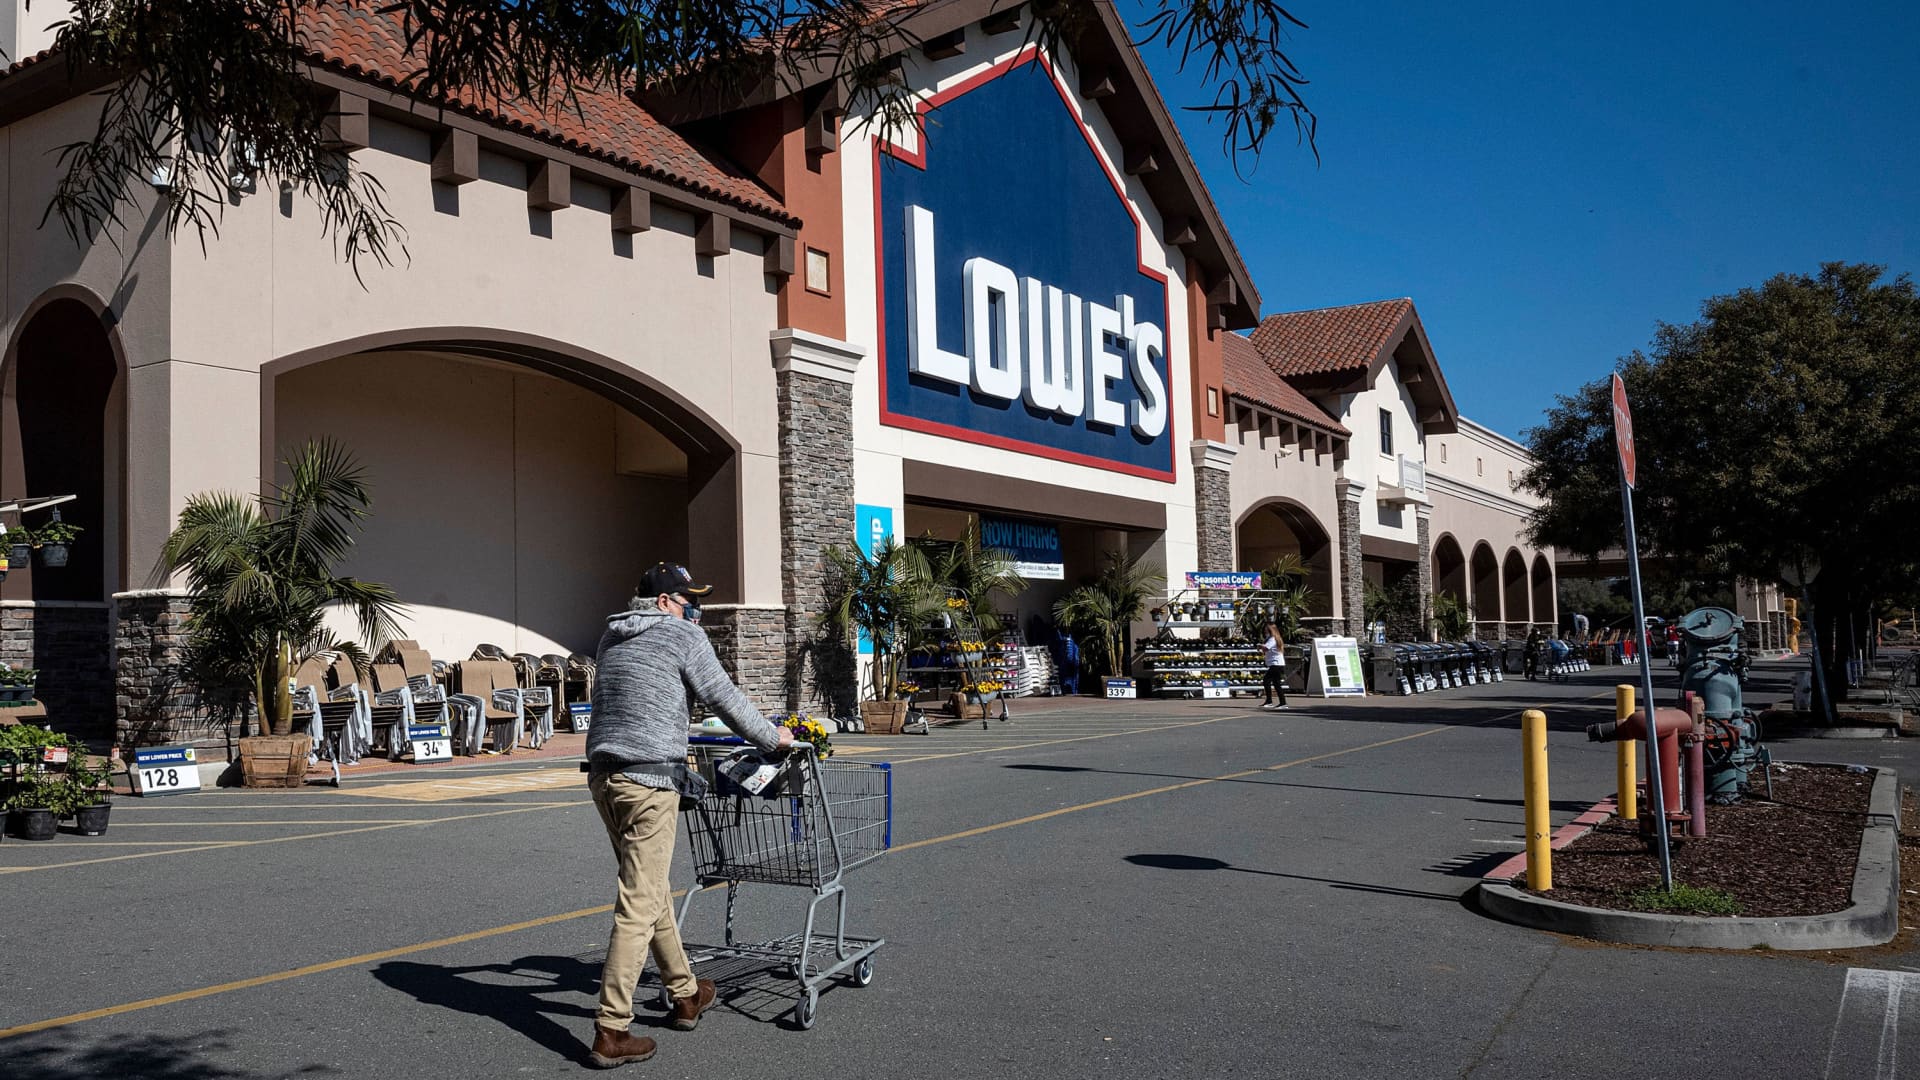 A customer pushes a shopping cart towards the entrance of a Lowe's store in Concord, California, on Tuesday, Feb. 23, 2021.